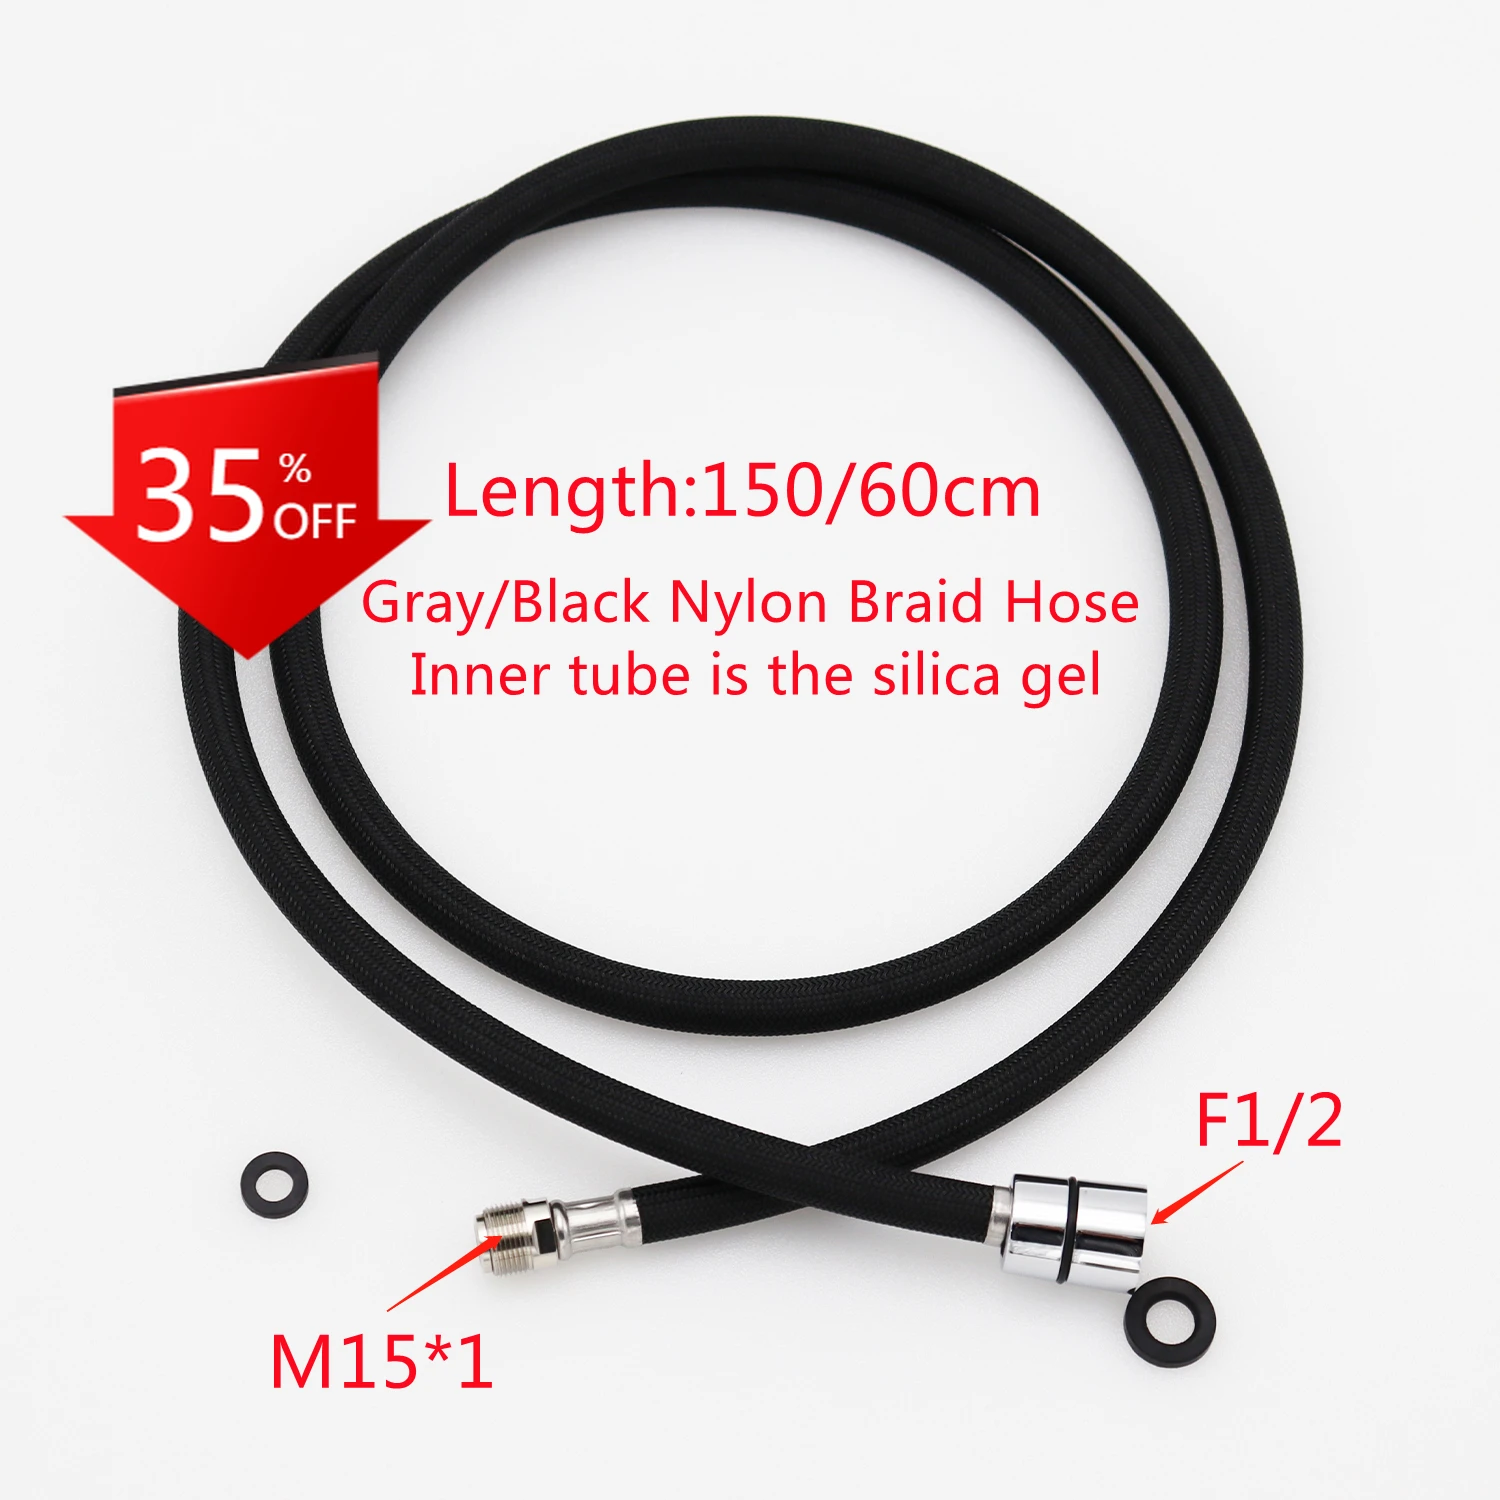 

60/150cm F1/2 M15*1 Faucet Pull Out Faucet Hose Black Gray Nylon Braided Hose Replacement Hose for Pull Down Kitchen/Basin Tap